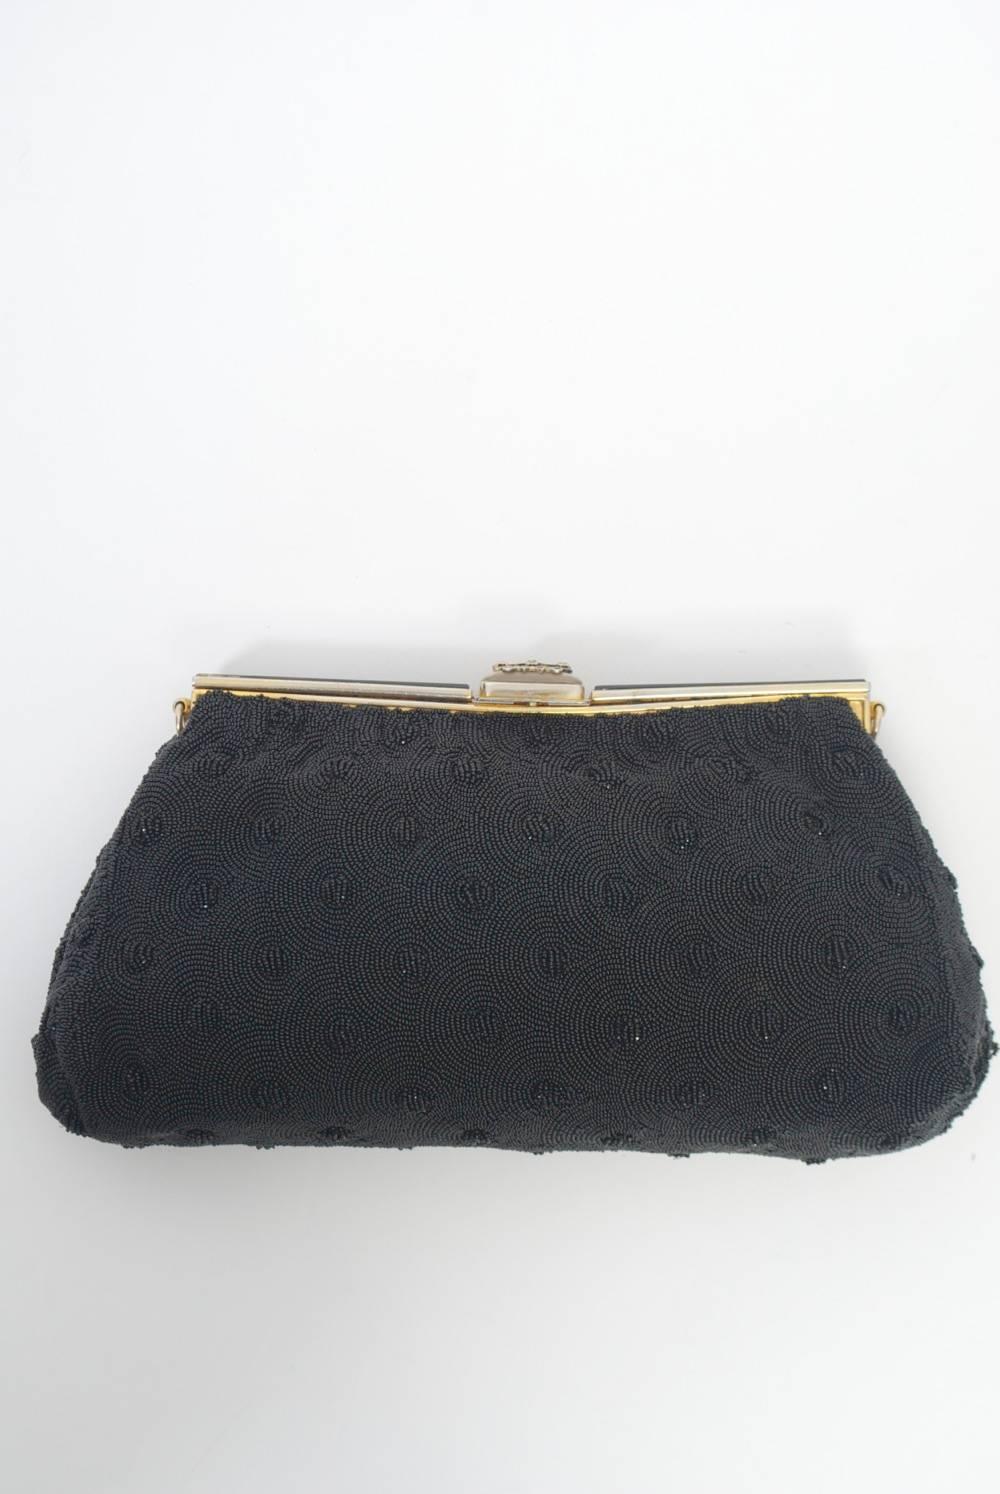 1950s-'60s black microbeaded clutch with fishscale motif of contrasting smooth and faceted beads throughout. The gold metal frame is beaded as well, here with a chain design on top of solid beads, which, both here and in the body lend